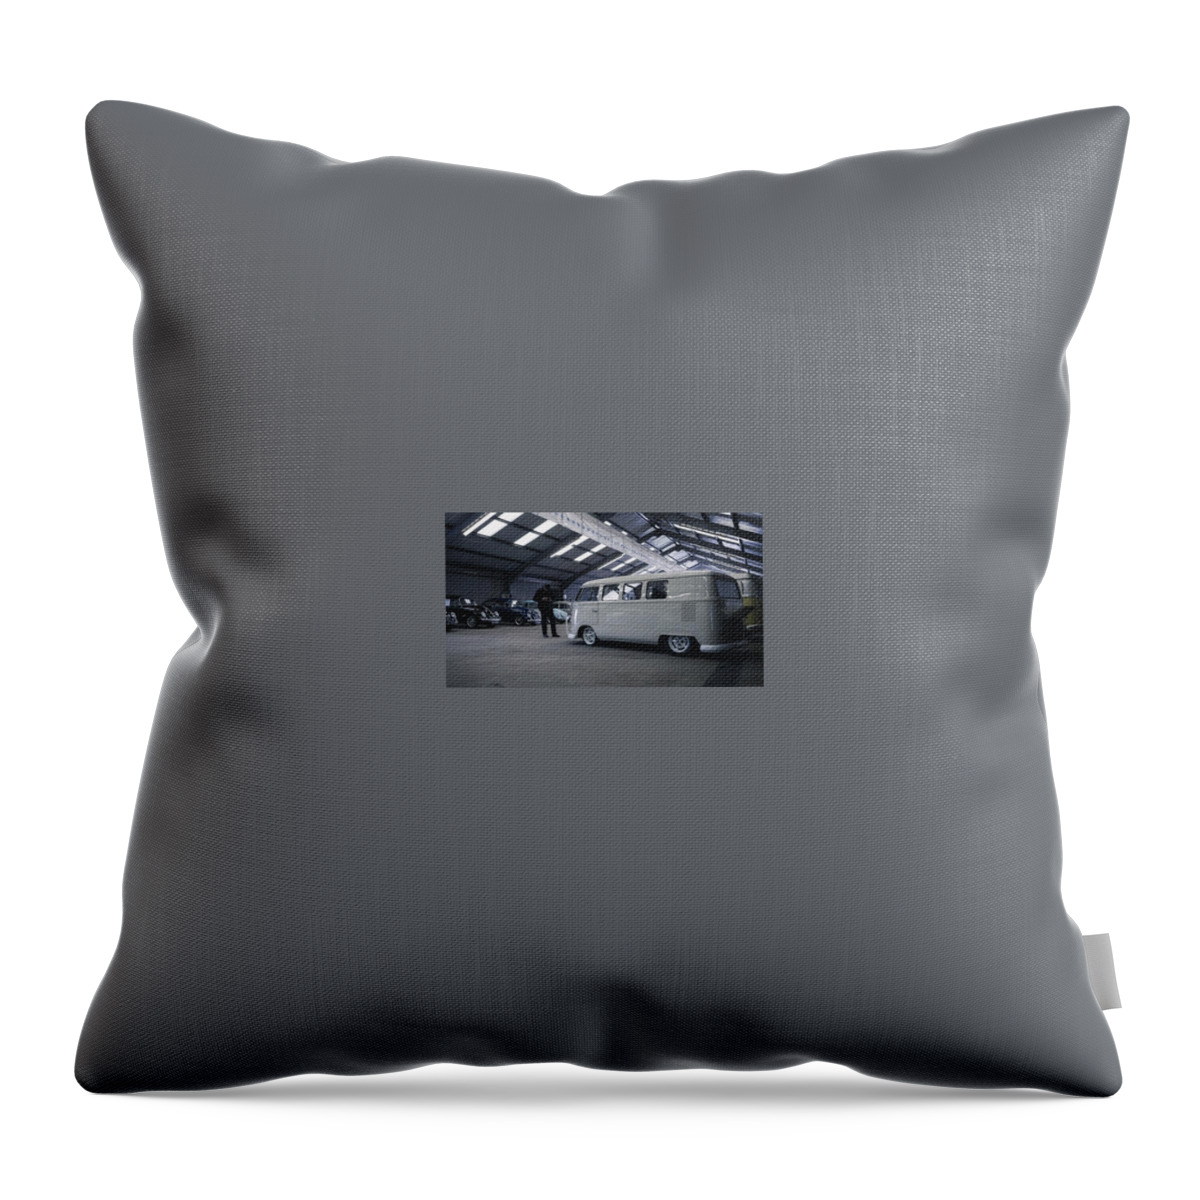 Volkswagen Microbus Throw Pillow featuring the photograph Volkswagen Microbus by Mariel Mcmeeking